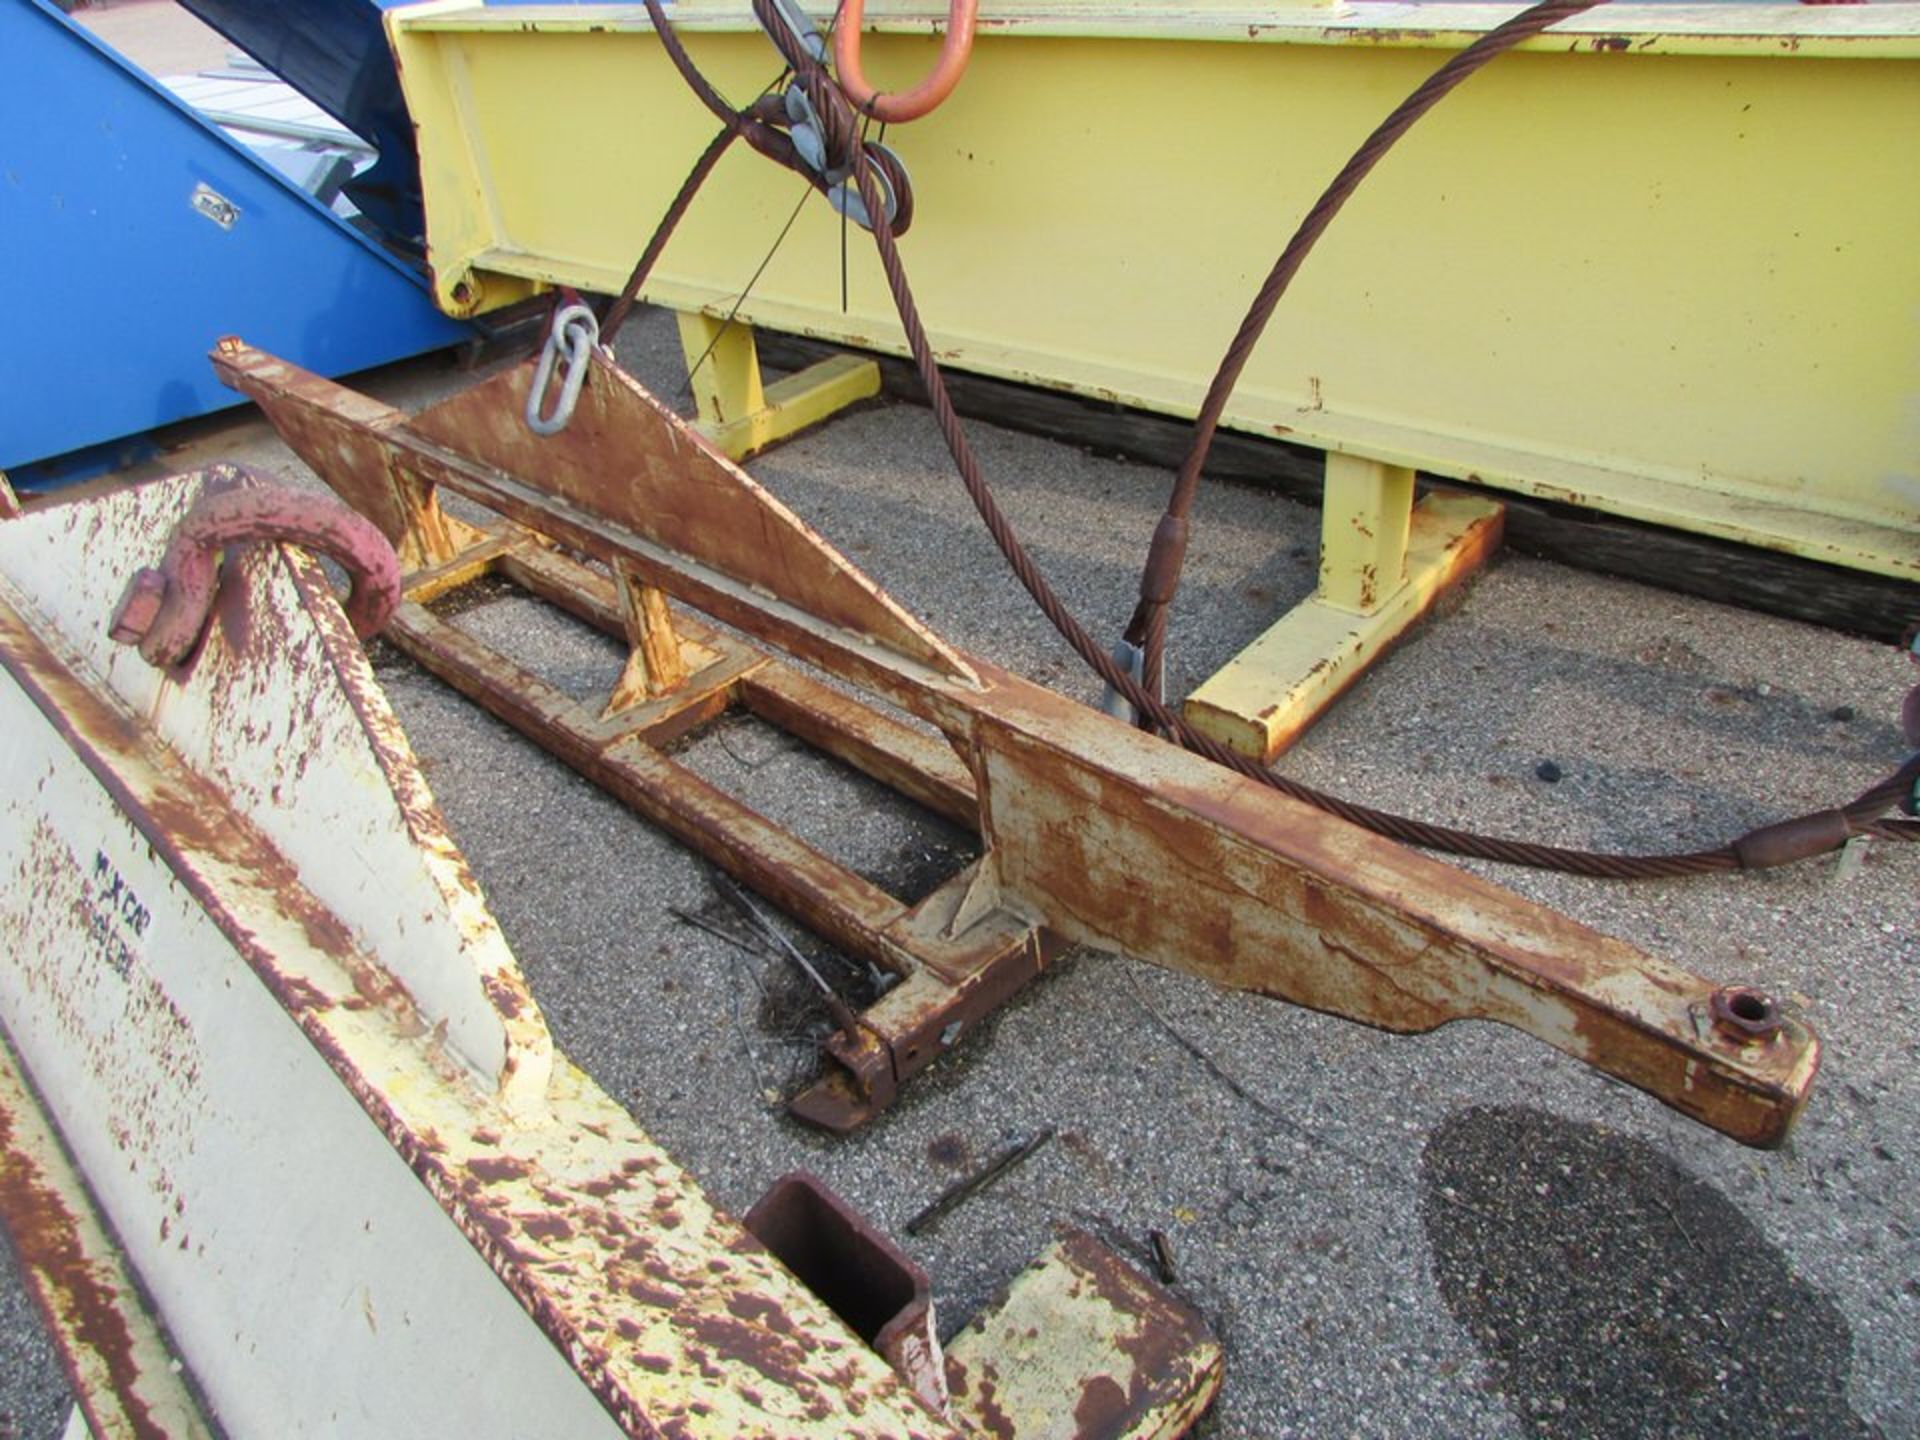 (3) Spreader Bar Lifting Attachments, 14', 11', 134". Loc. 420 Main Ave E, West Fargo, ND 58078 - Image 3 of 4